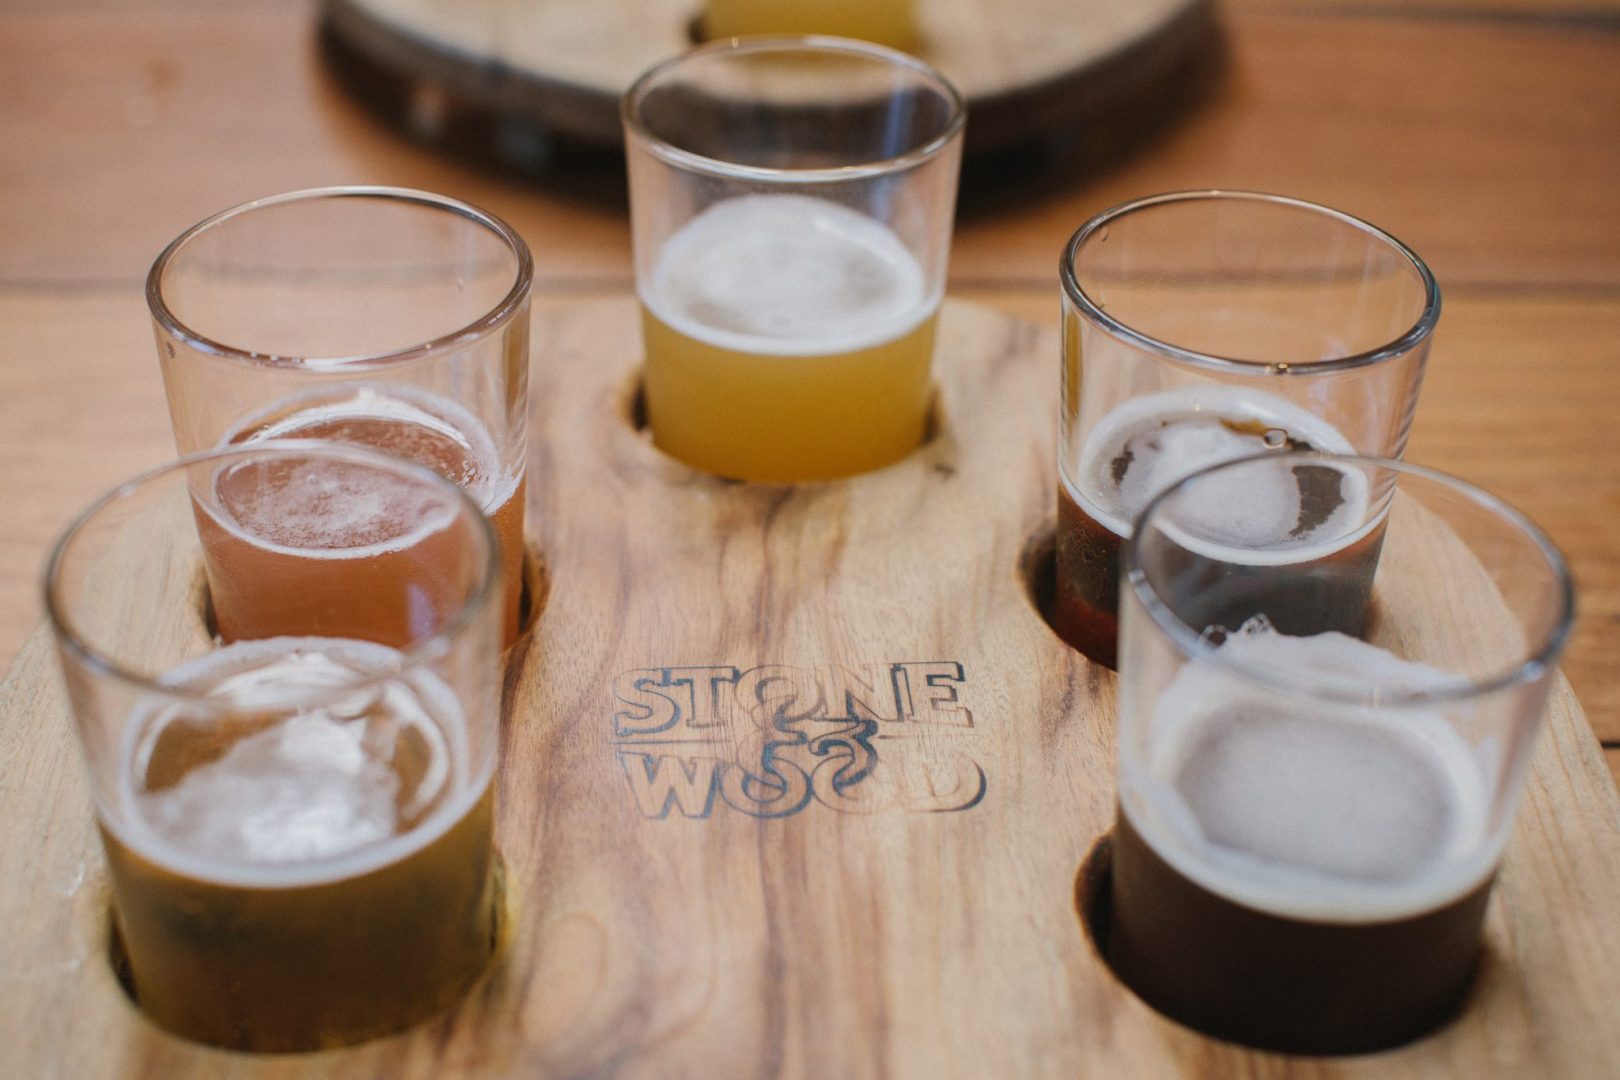 Stone & Wood Brewery Byron Bay – see what’s at the heart of this conscious company